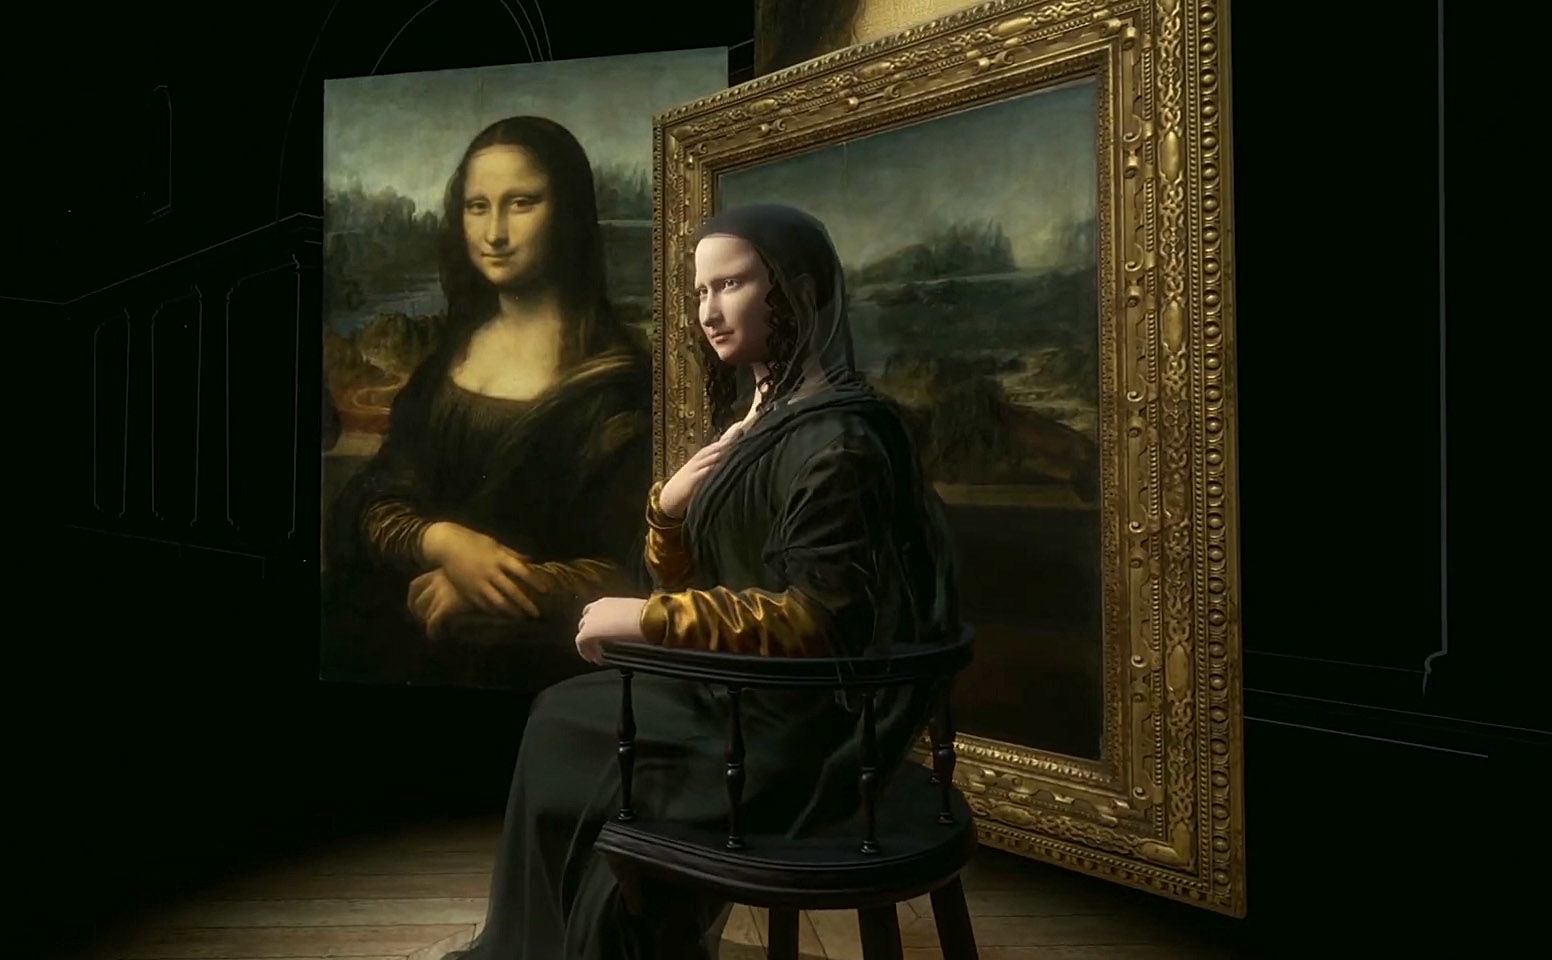 HTC recreated the 'Mona Lisa' in 3D for the Louvre's da Vinci exhibition | DeviceDaily.com